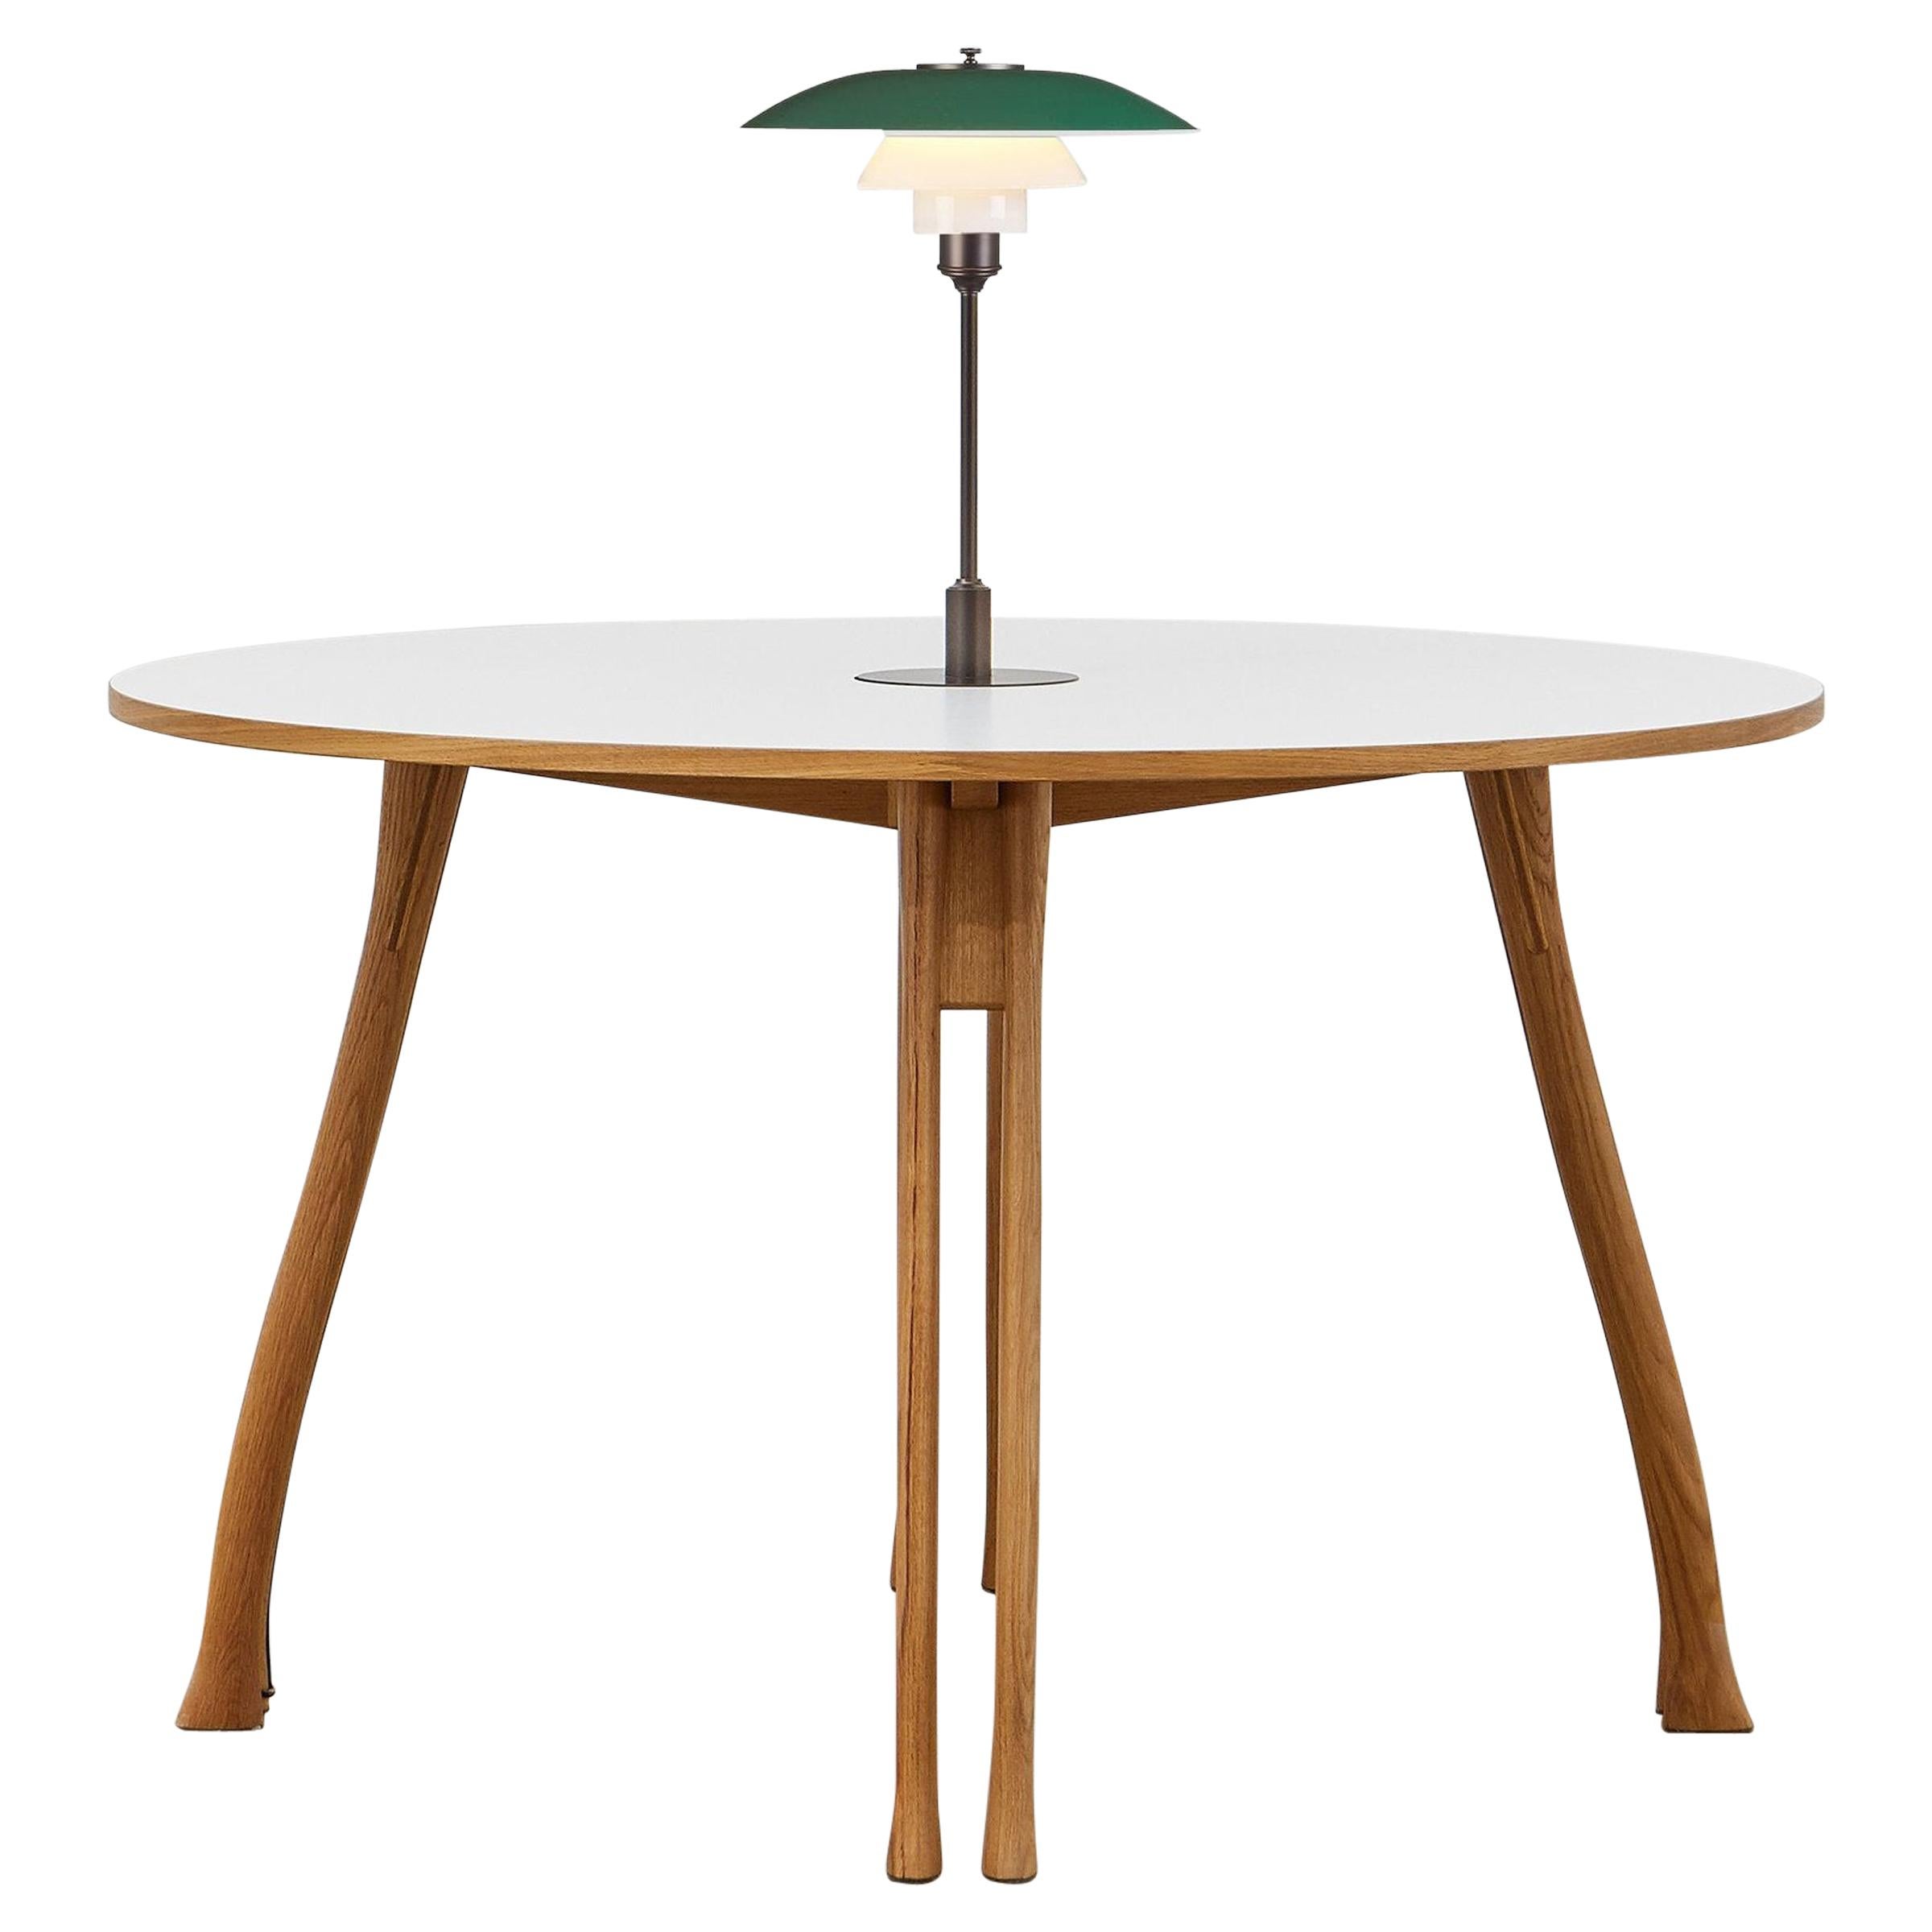 PH Axe Table, natural oak legs, laminated plate, green PH 3 ½ - 2 ½ lamp For Sale